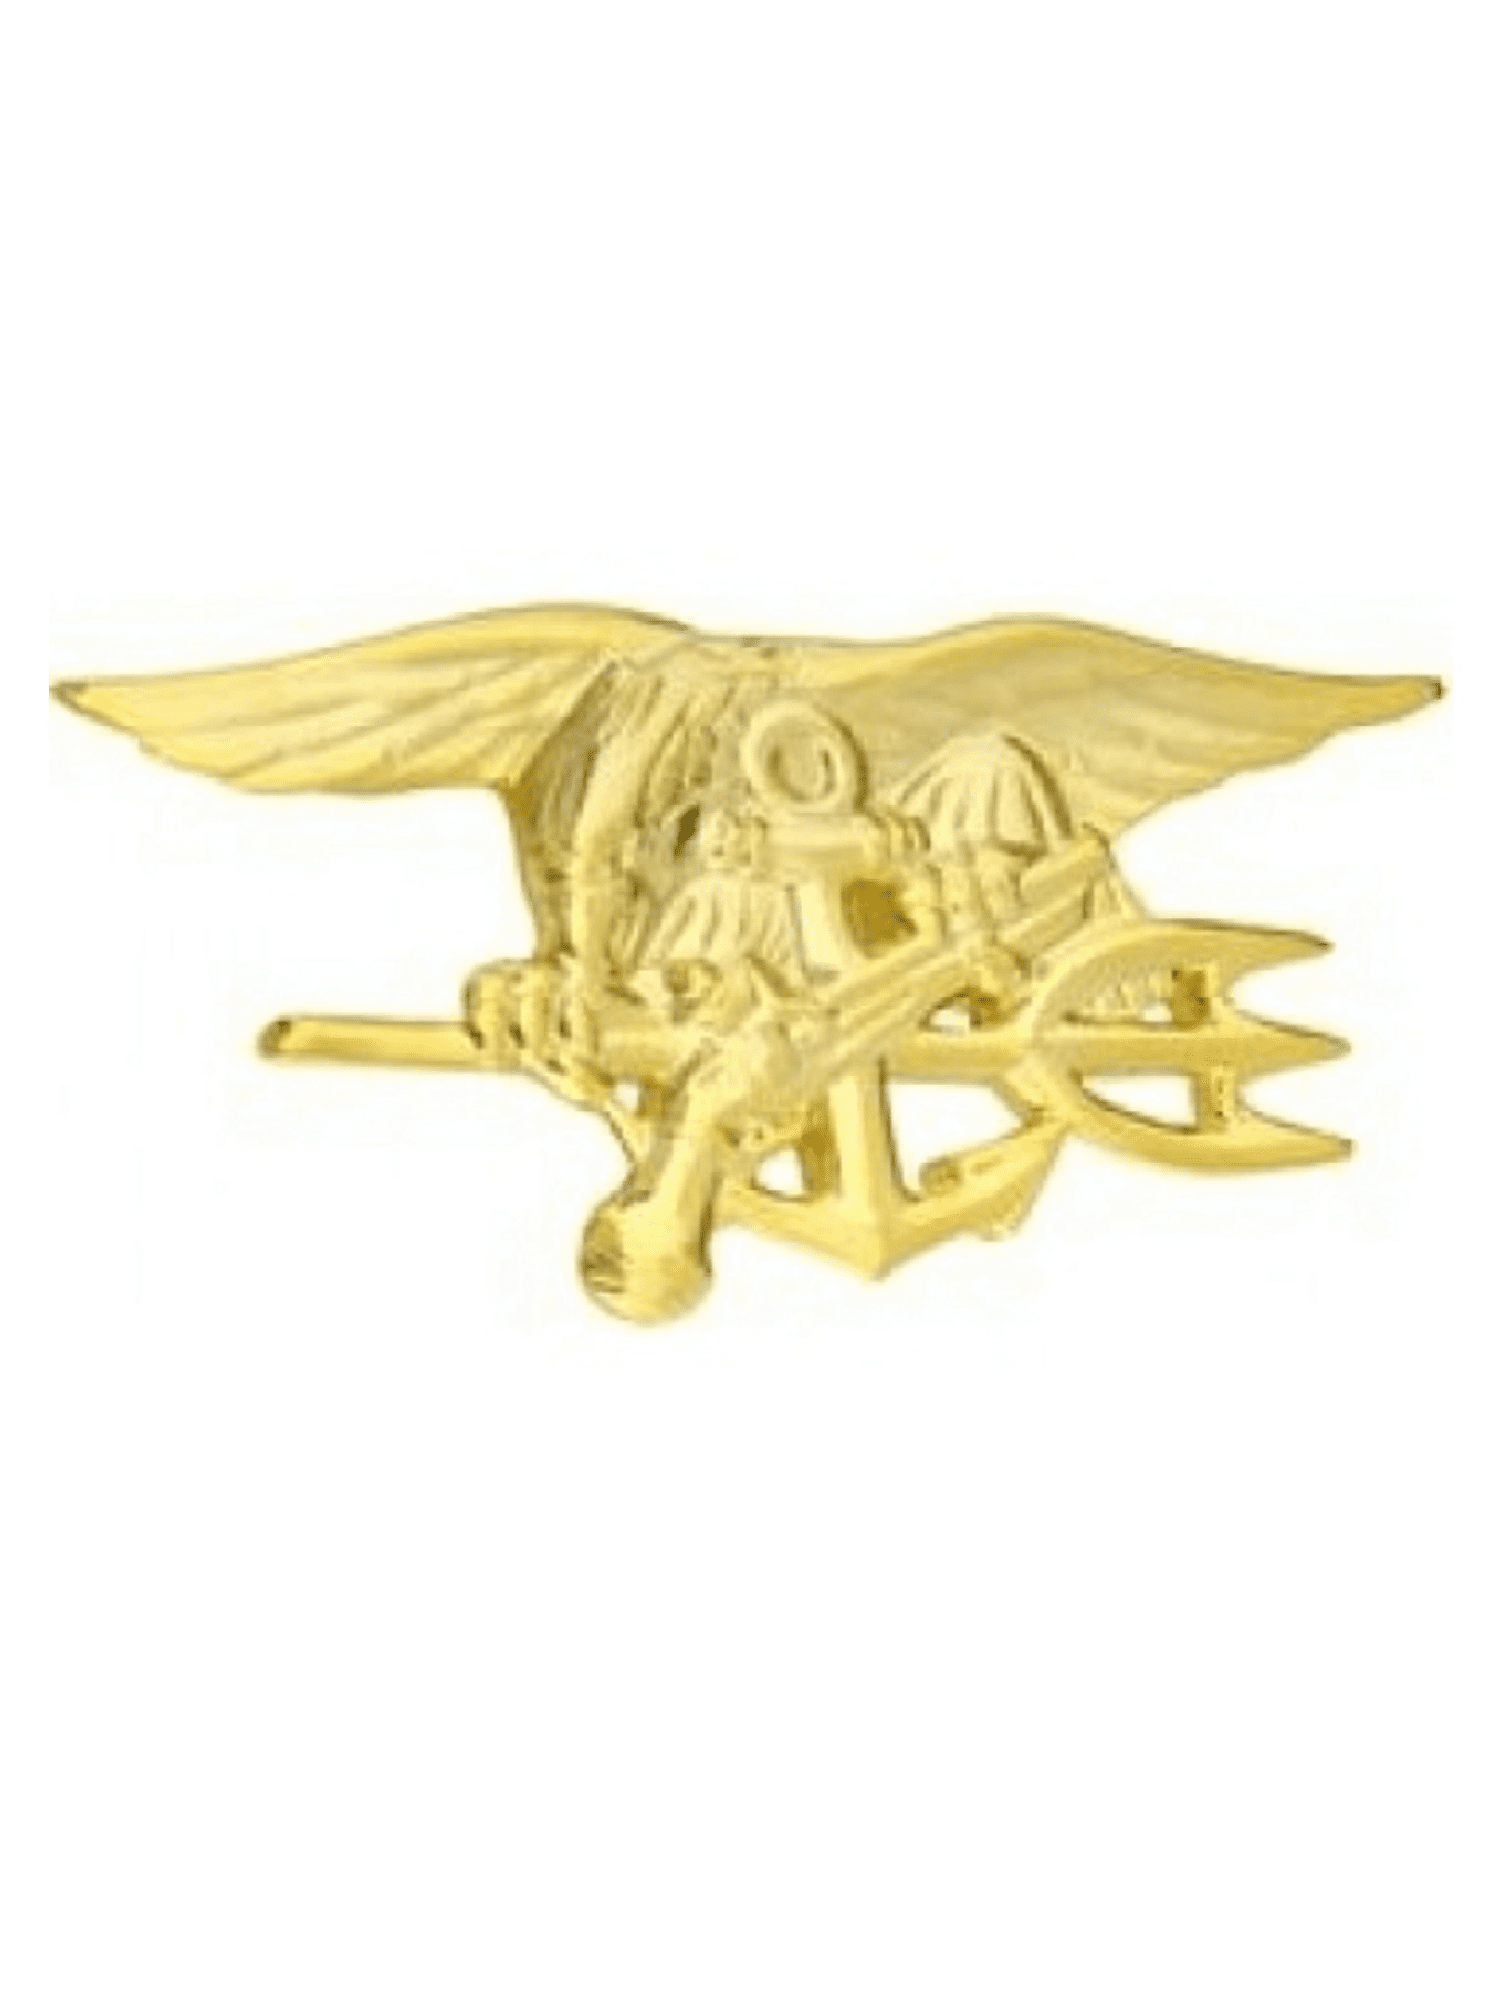 United States Navy Seals Trident Gold Lapel Pin 2-3/4